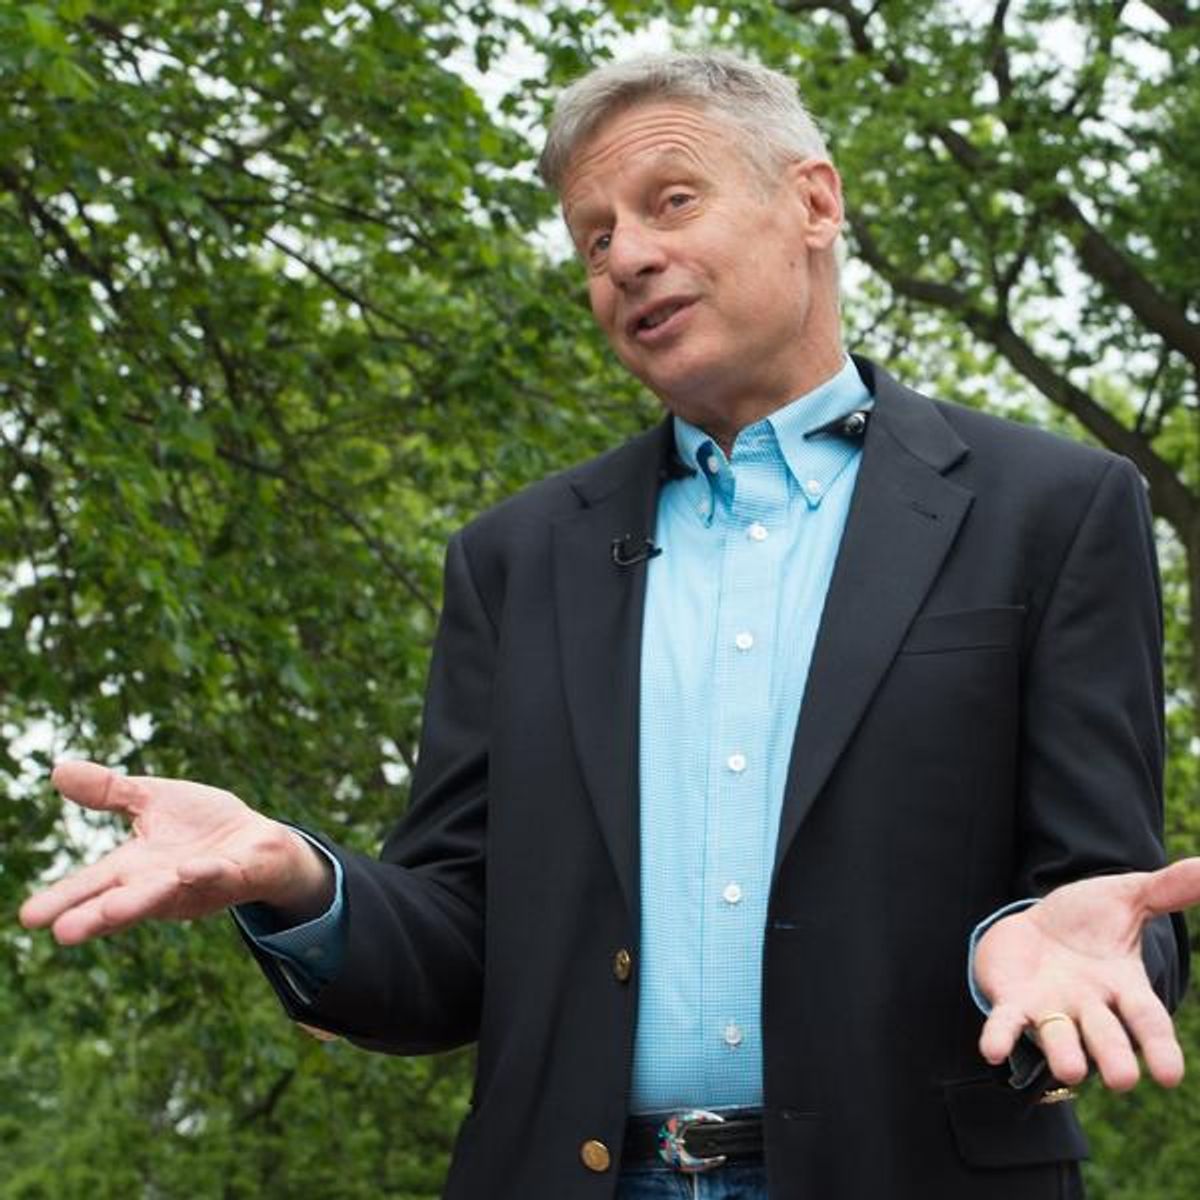 Who Is Gary Johnson?